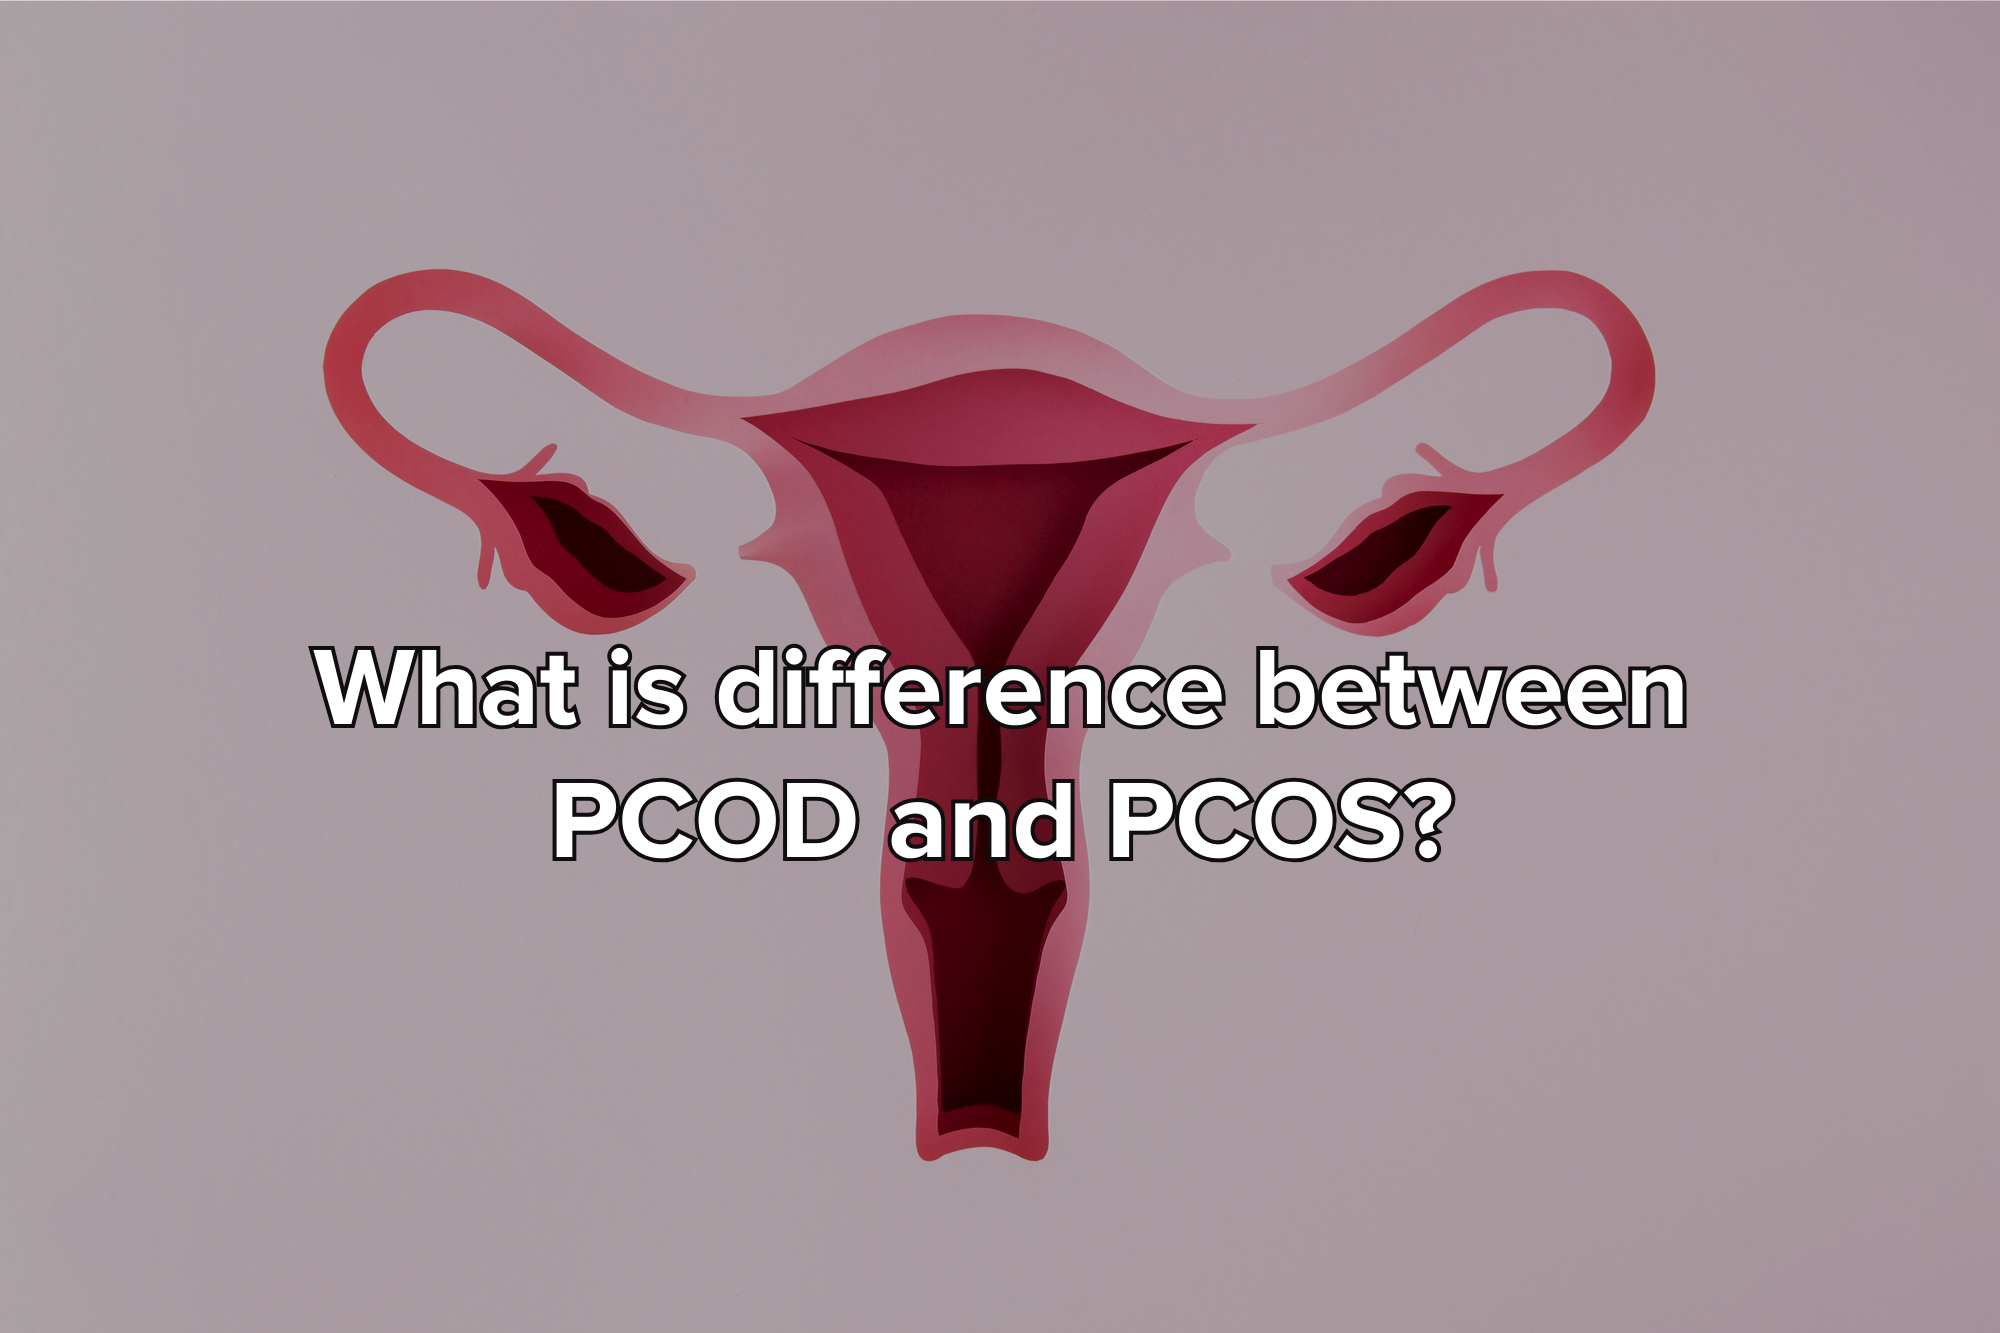 What is difference between PCOD and PCOS?